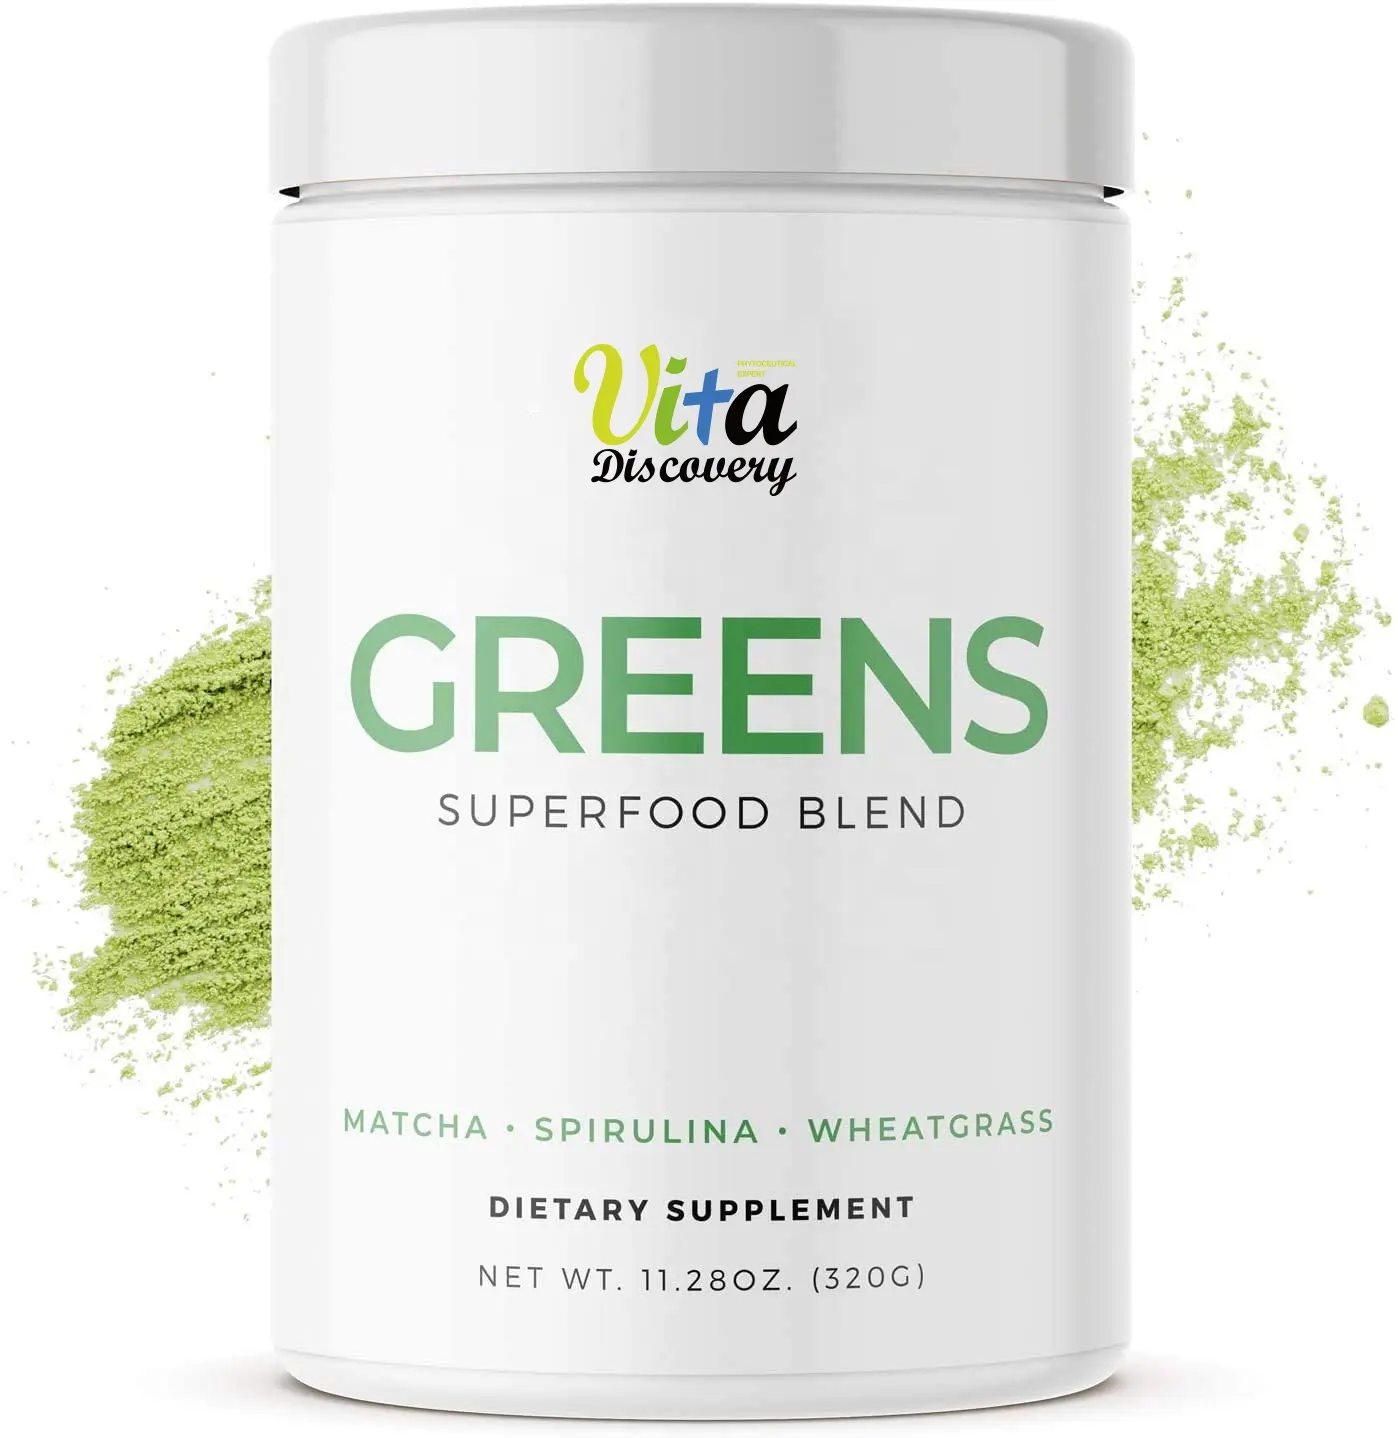 Private Label Greens Superfood Powder with Super Green Mixed Veggie Ingredients for Immune Support Supplement